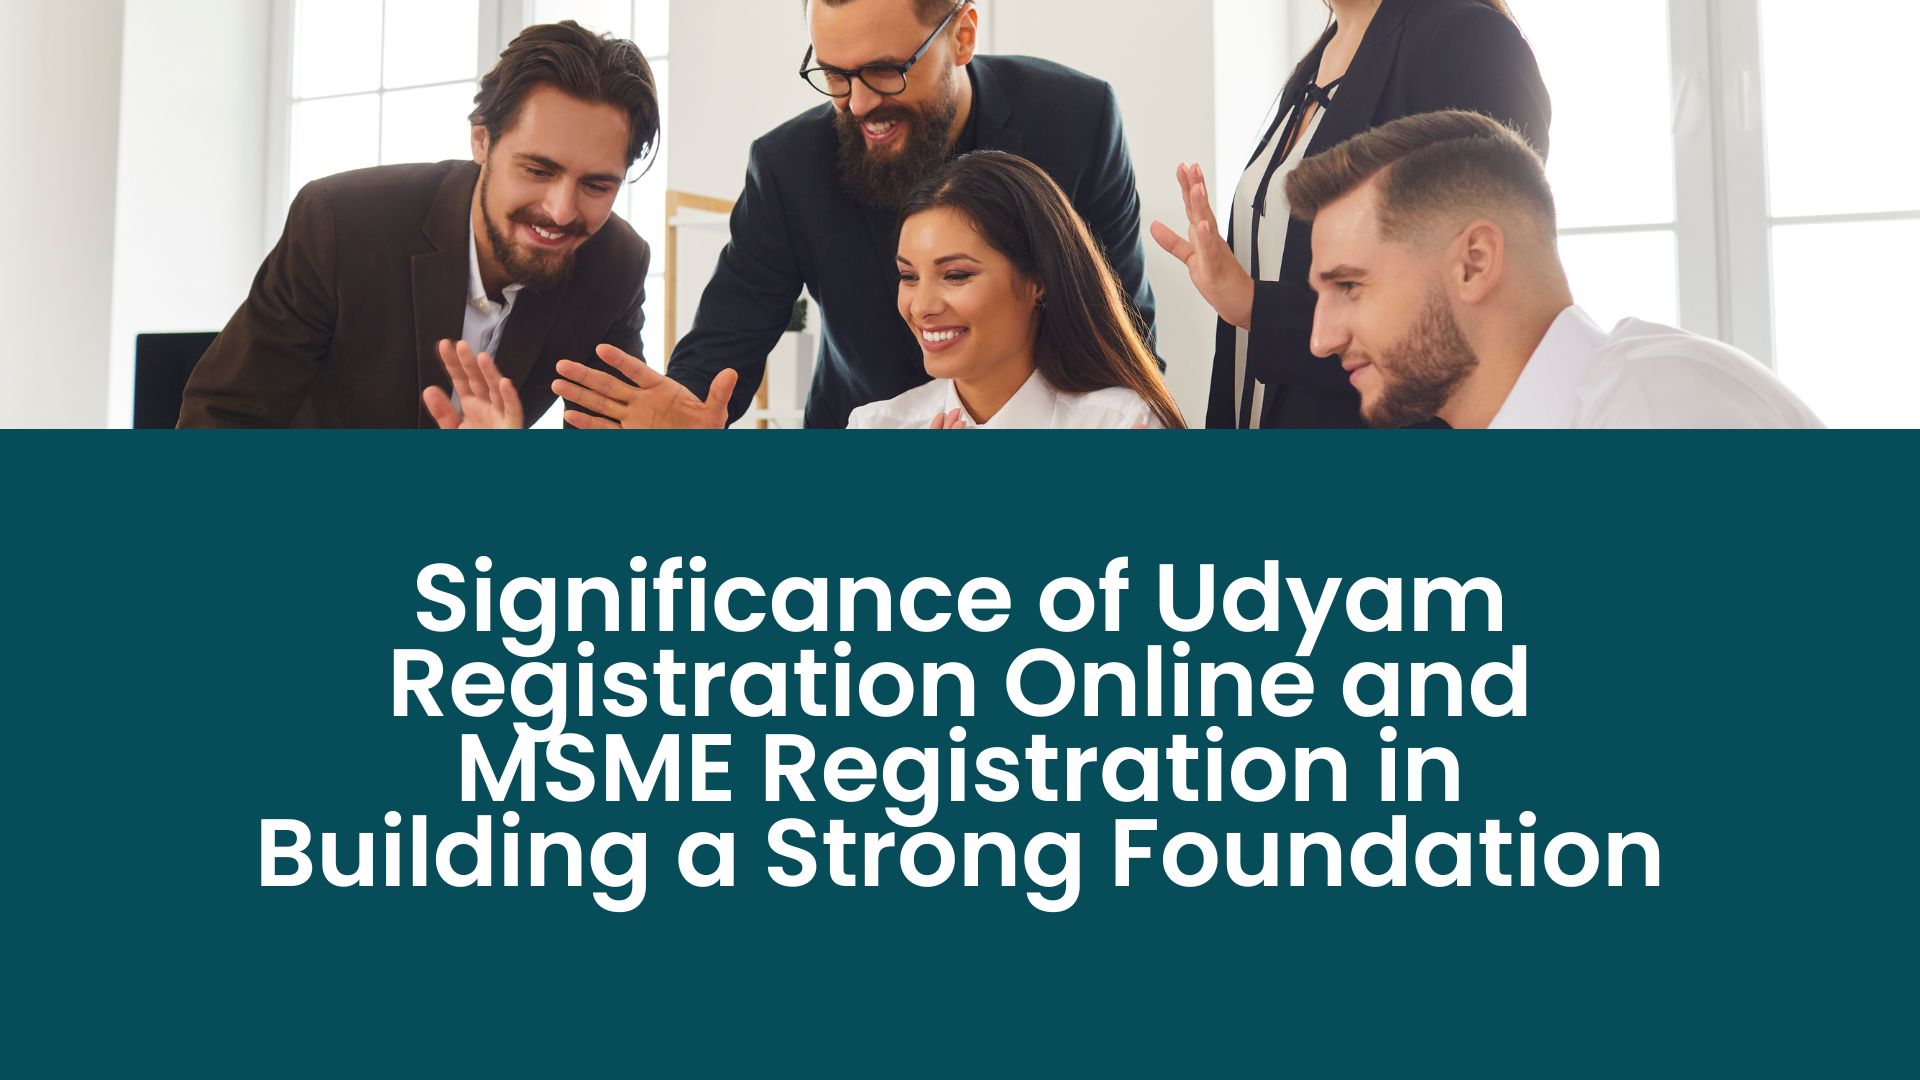 Significance of Udyam Registration Online and MSME Registration in Building a Strong Foundation